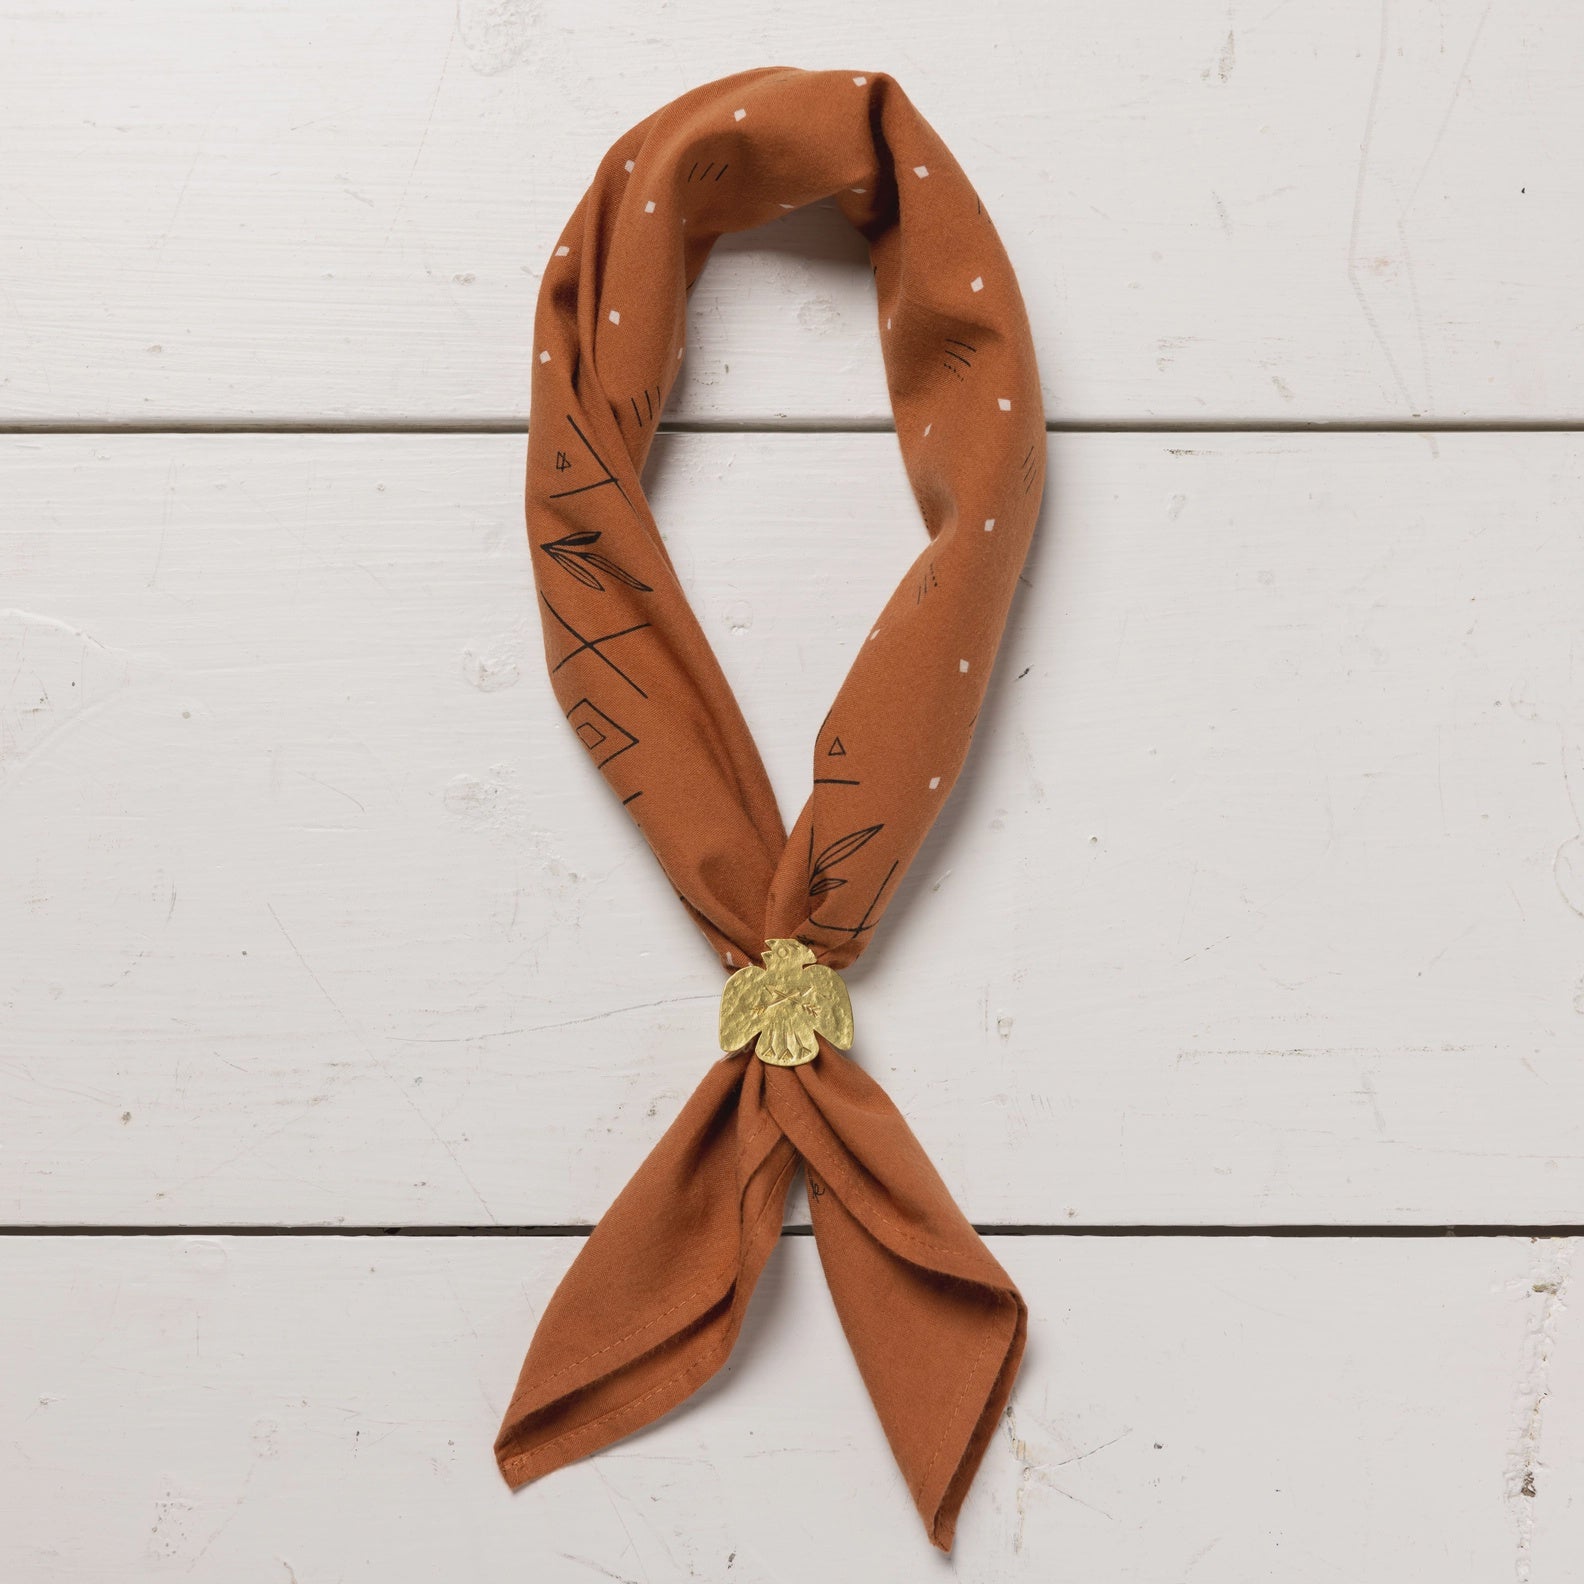 A brown silk scarf with black geometric patterns, elegantly tied and secured with a golden tassel, displayed on a white wooden background in Arizona style.